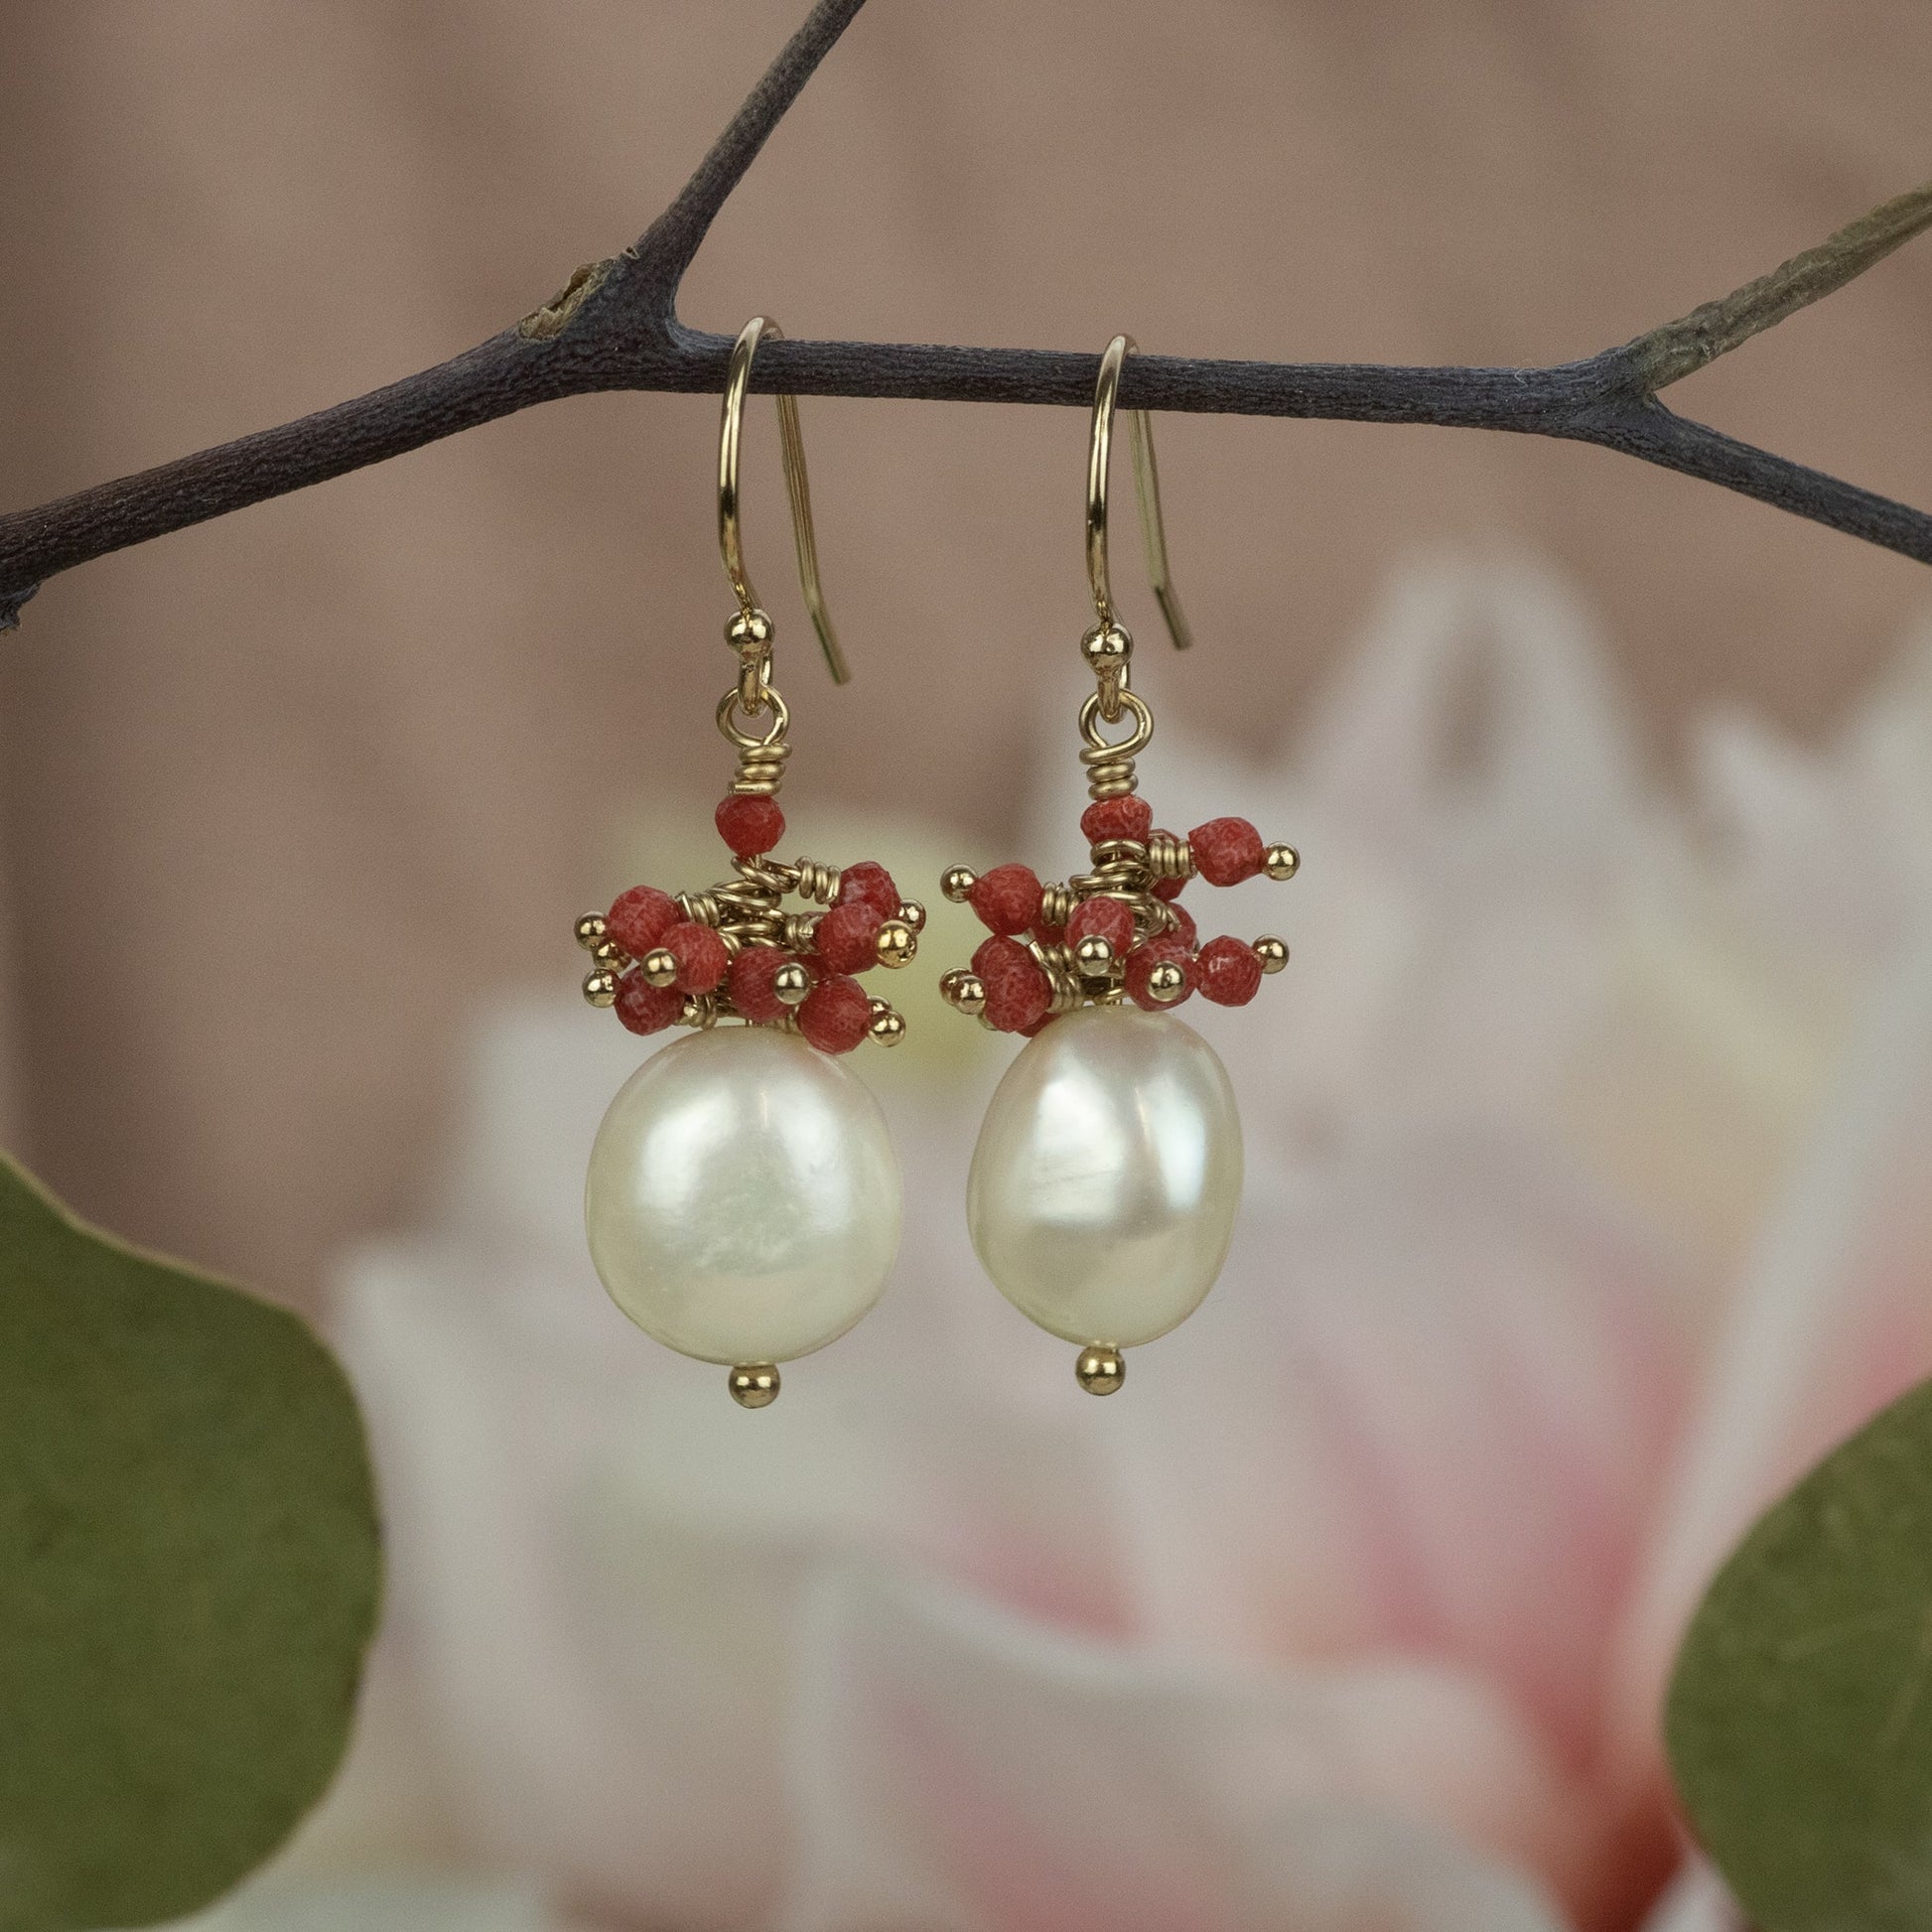 Coral & Pearl Earrings - Happiness - Silver & Gold